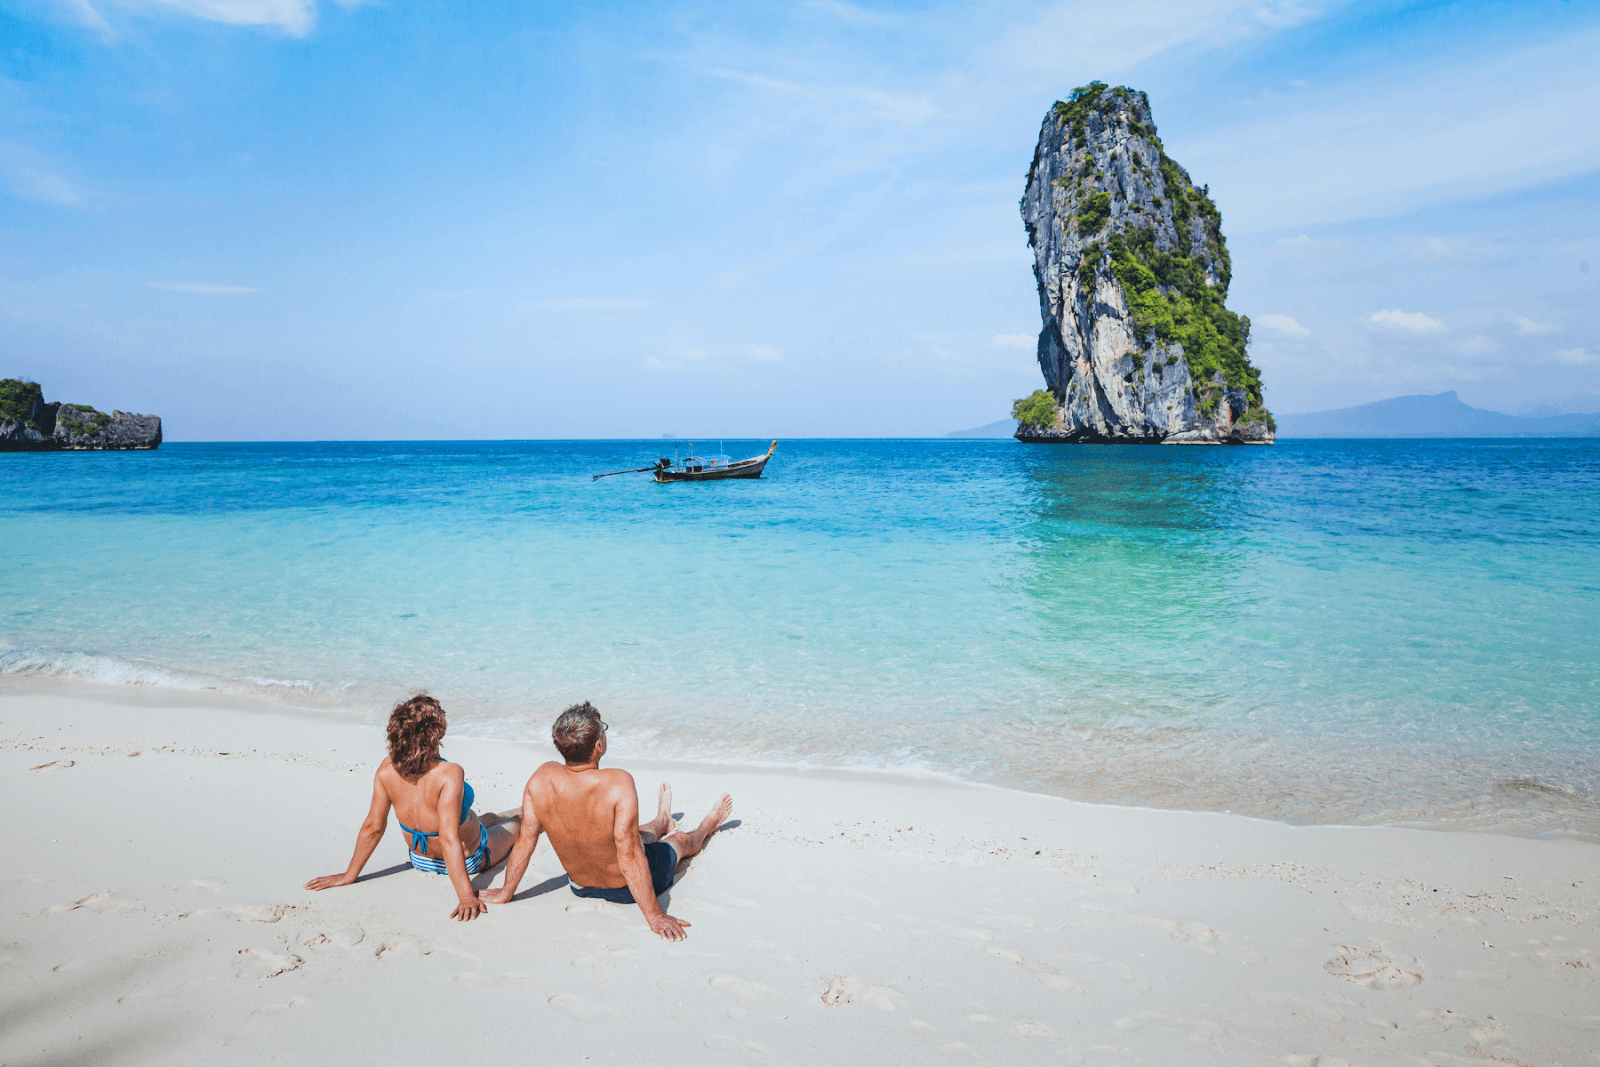 The image displays a couple relaxing on a beach in Asia. The beach has white sand with turquoise waters, and a large rock jets upward from the ocean floor with a small boat nearby.